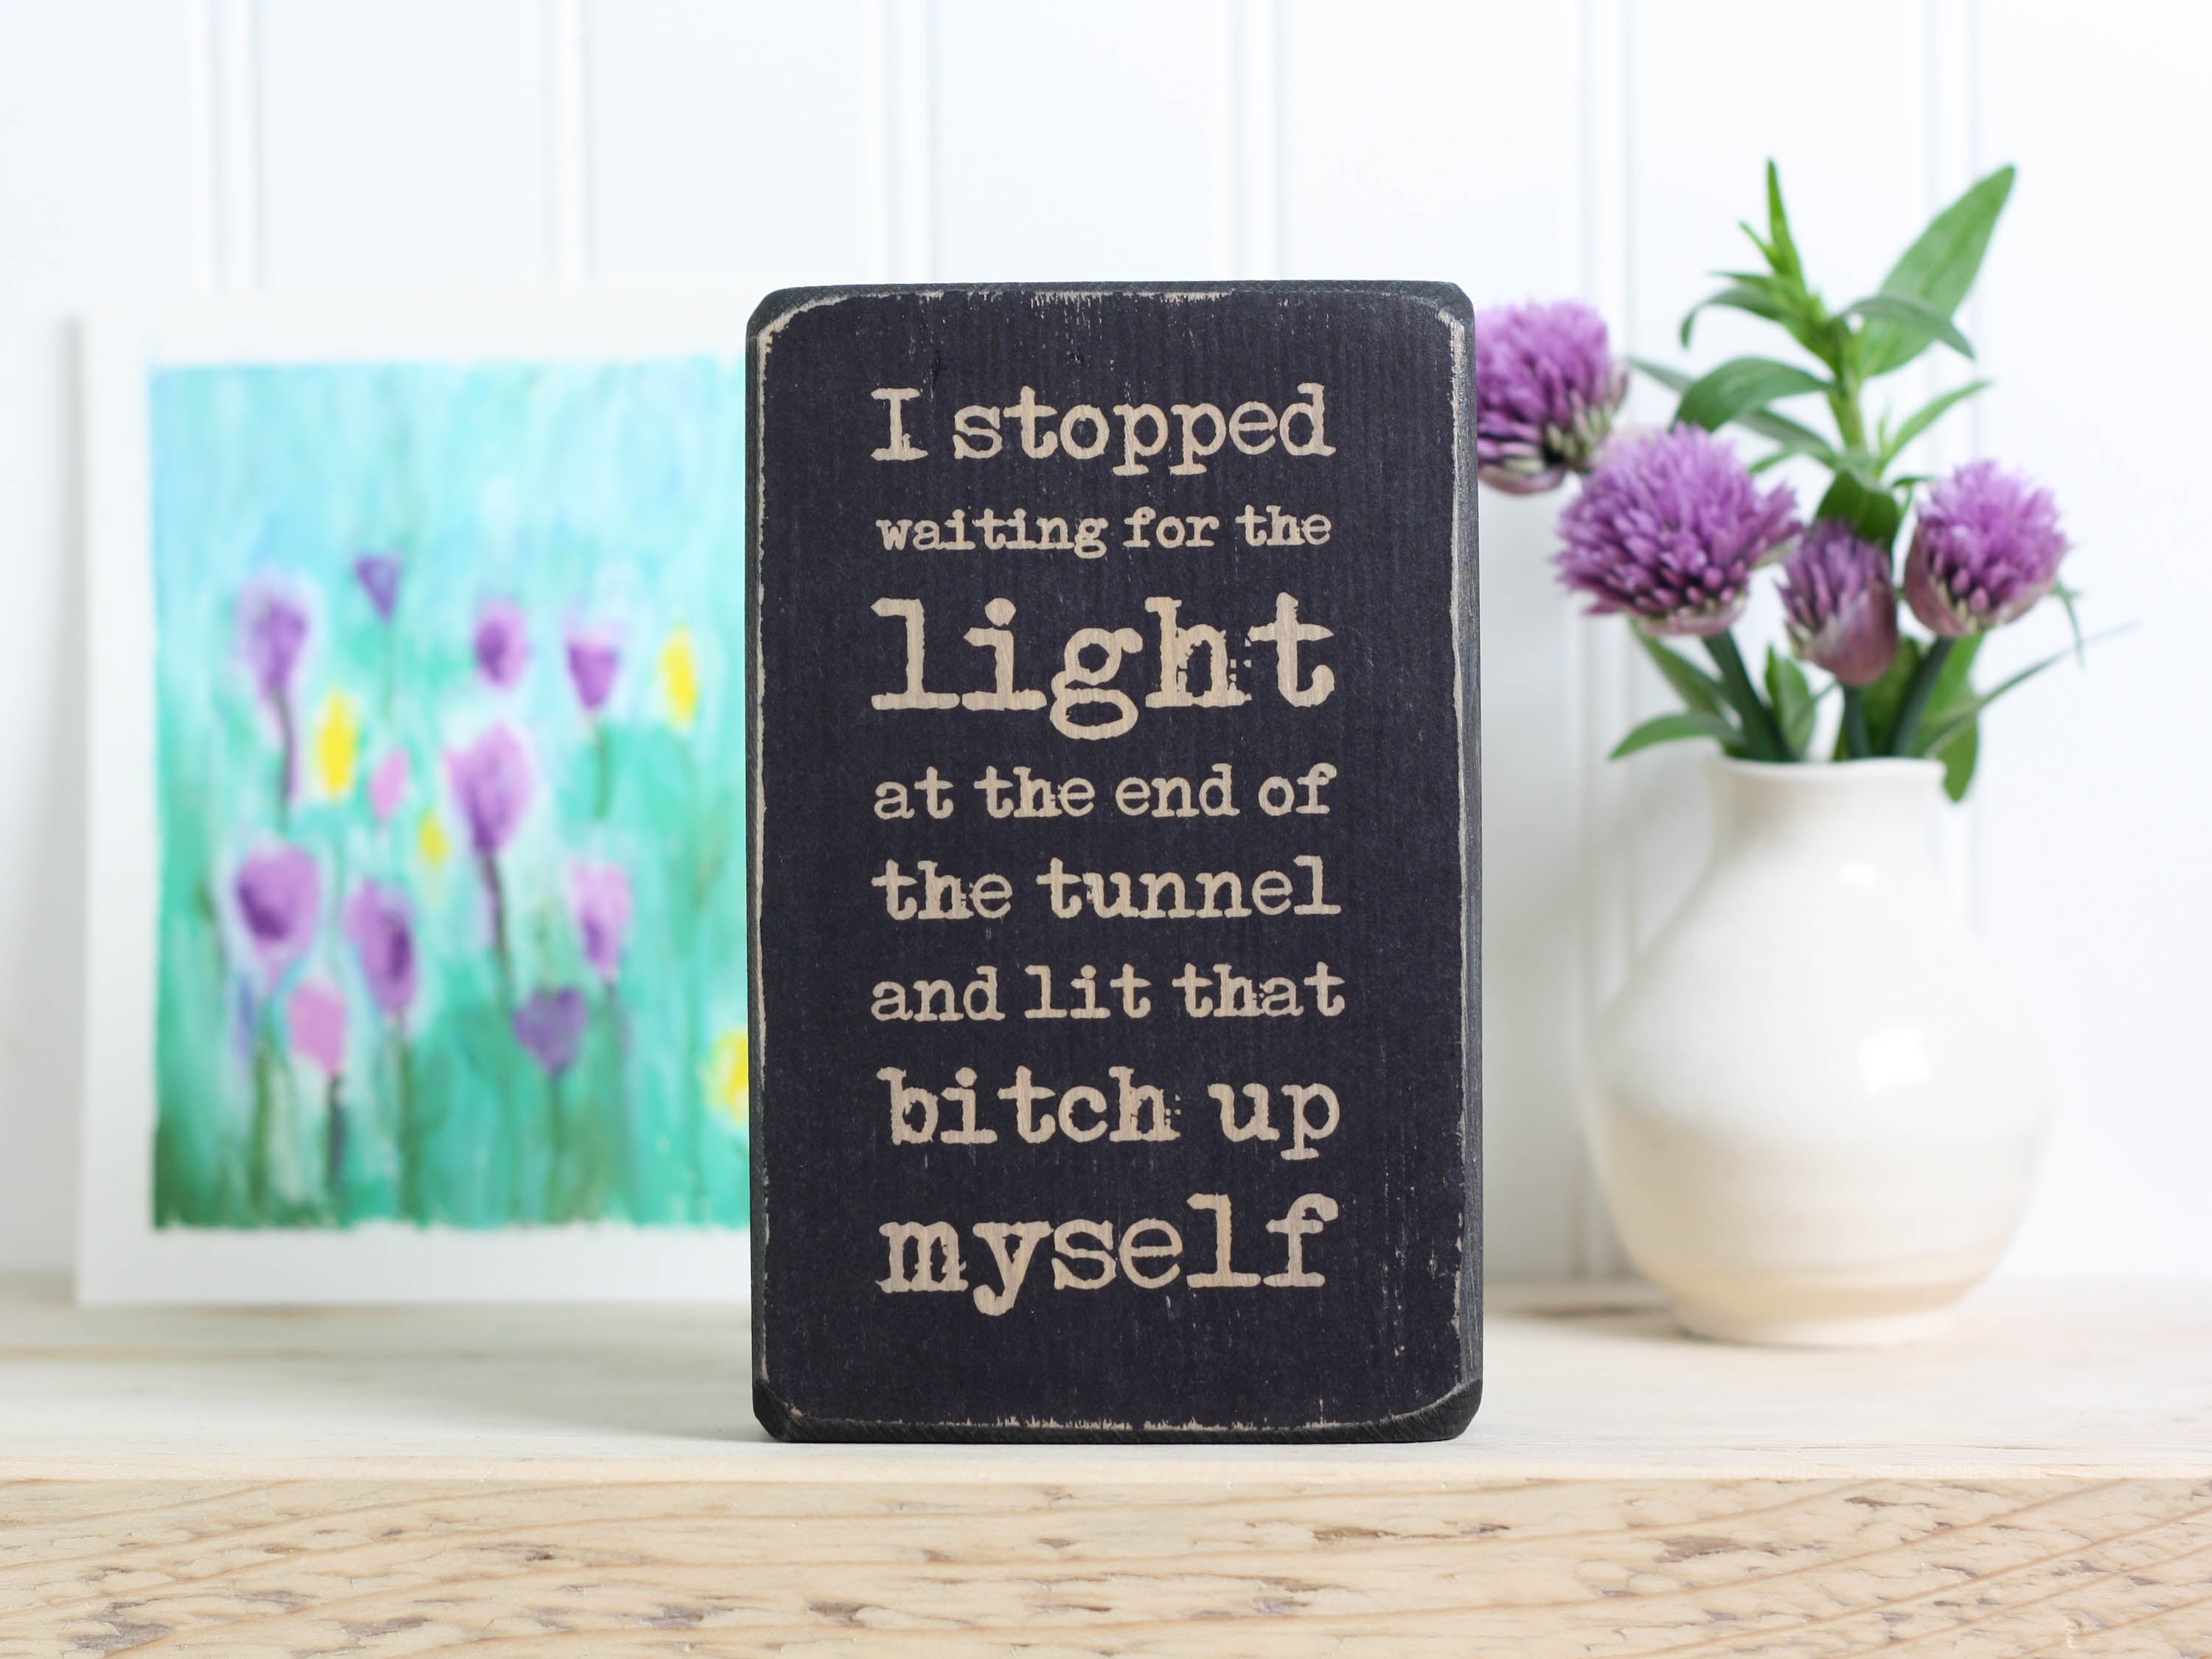 Small wood quote block in distressed black with the saying "I stopped waiting for the light at the end of the tunnel and lit that bitch up myself."